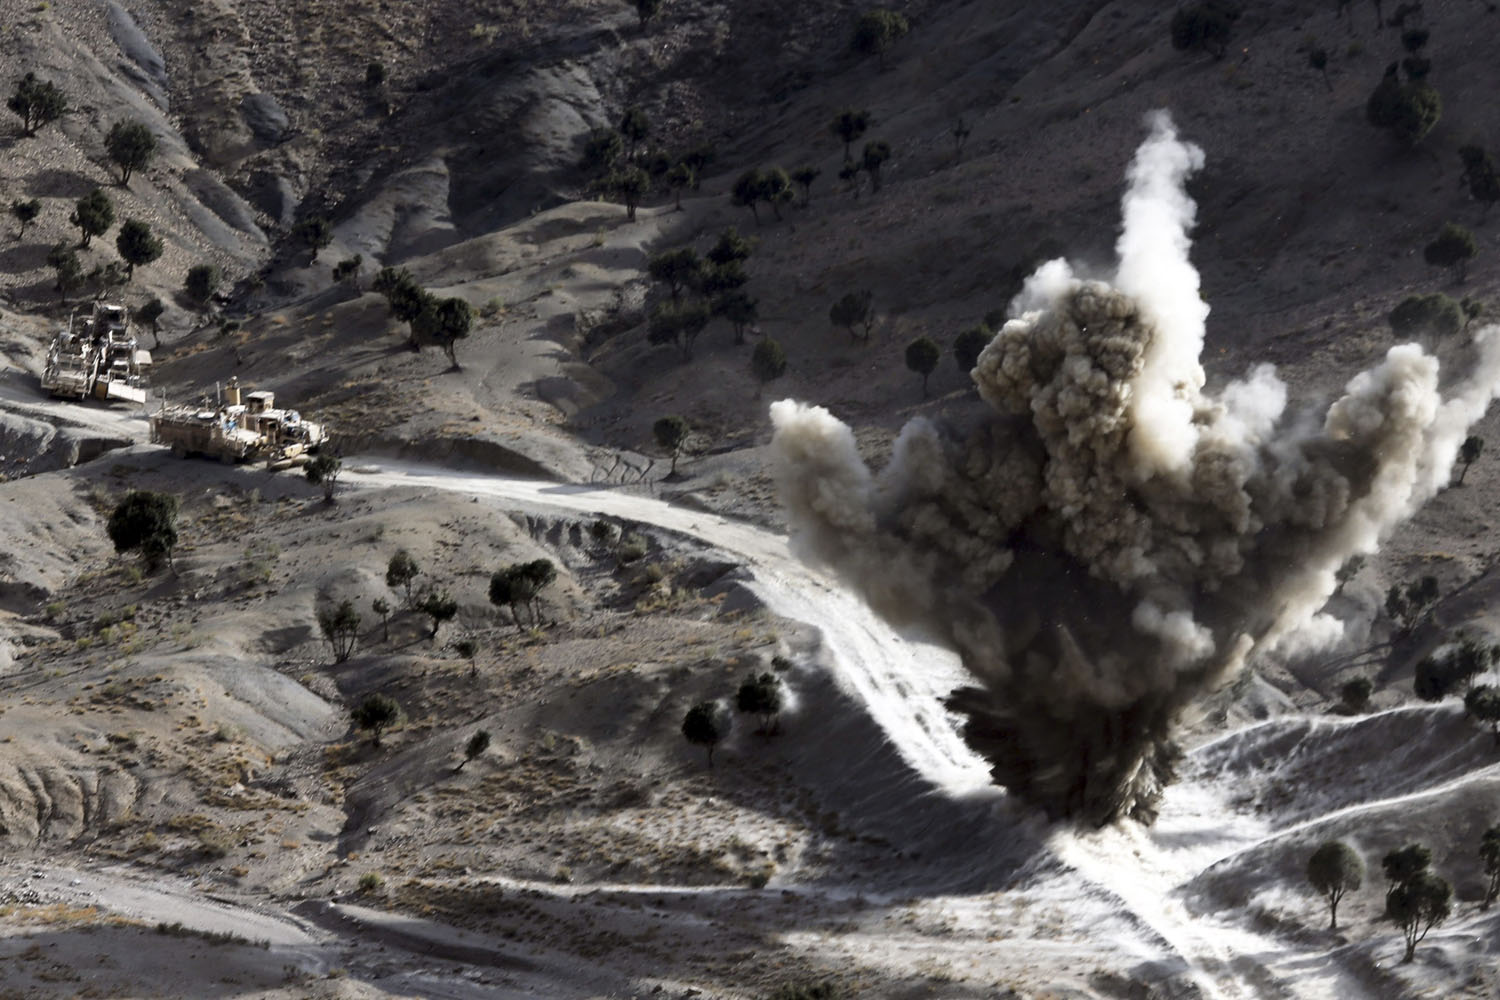 Image: Nov. 4, 2012. U.S soldiers blows up a roadside bomb set up by Taliban fighters near the town of Walli Was in Paktika province, near the border with Pakistan.